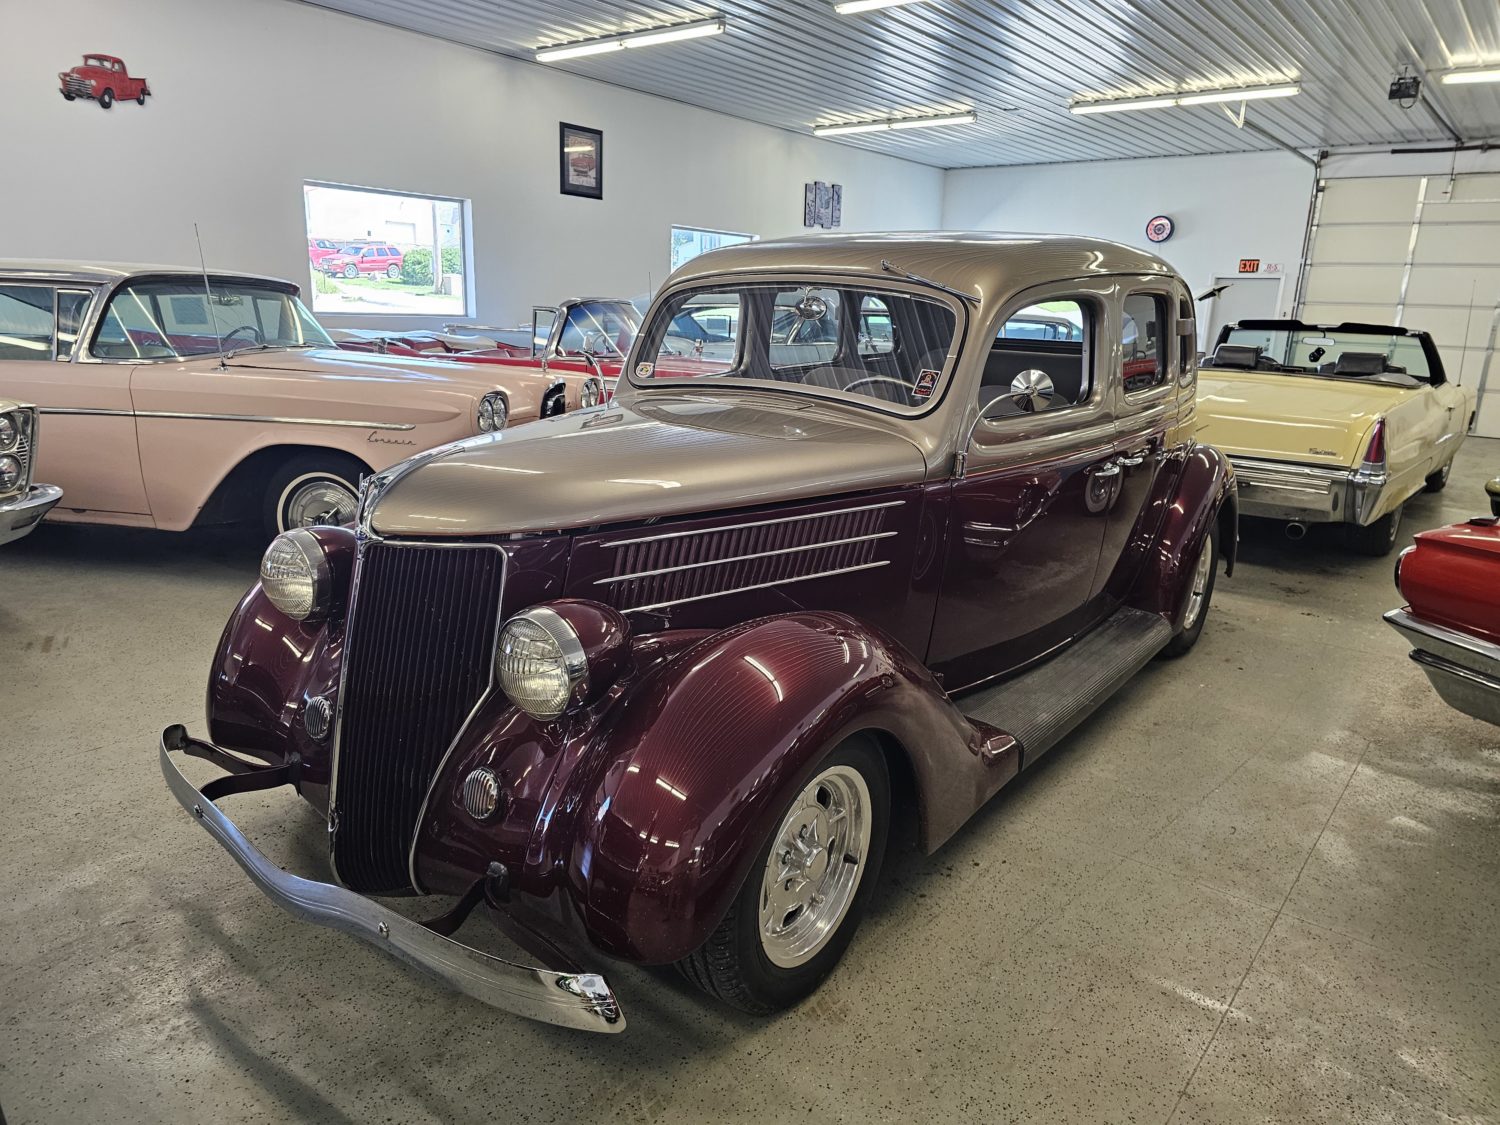 Approx. 100 American Classics Cars At Auction! The Sorensen Collection-LIVE ONSITE W/ONLINE BIDDING!  - image 8